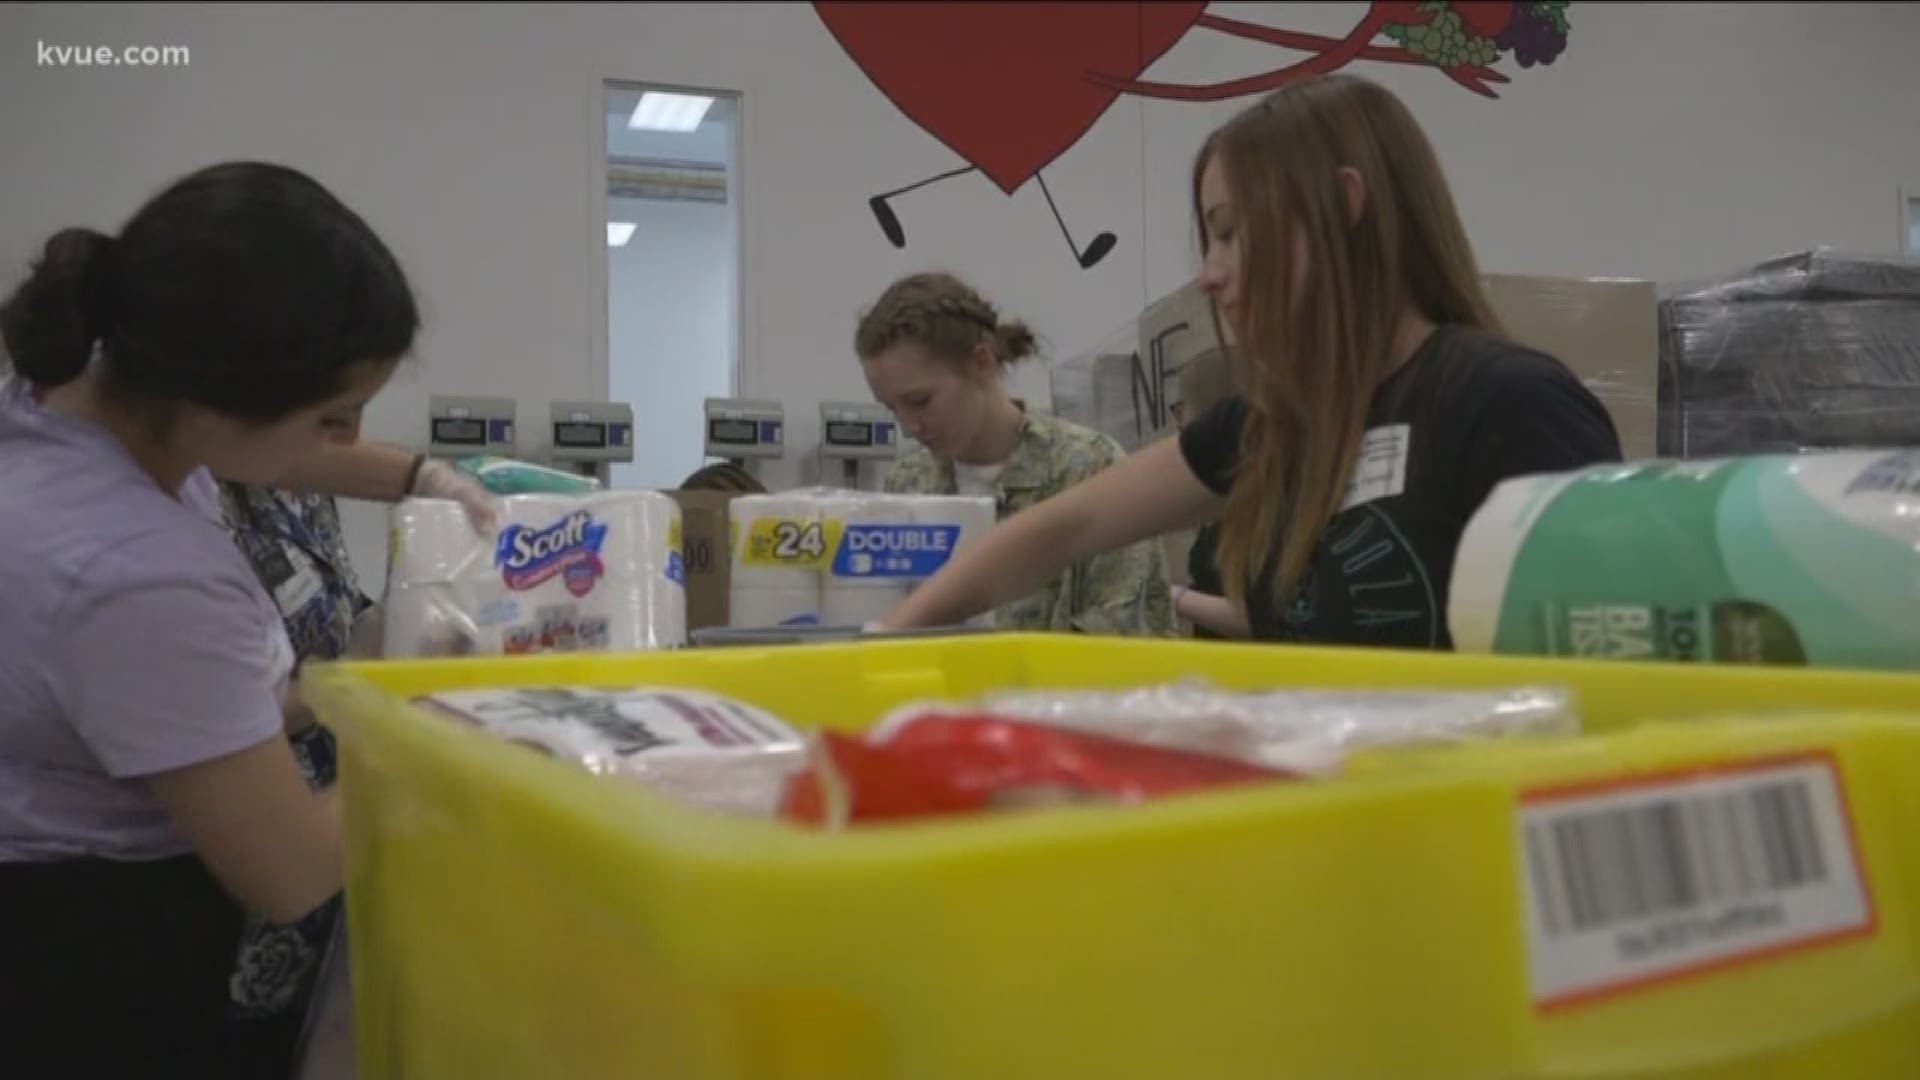 With schools closing and food hard to find in some grocery stores, local groups are stepping in to help those who may have trouble getting something to eat.